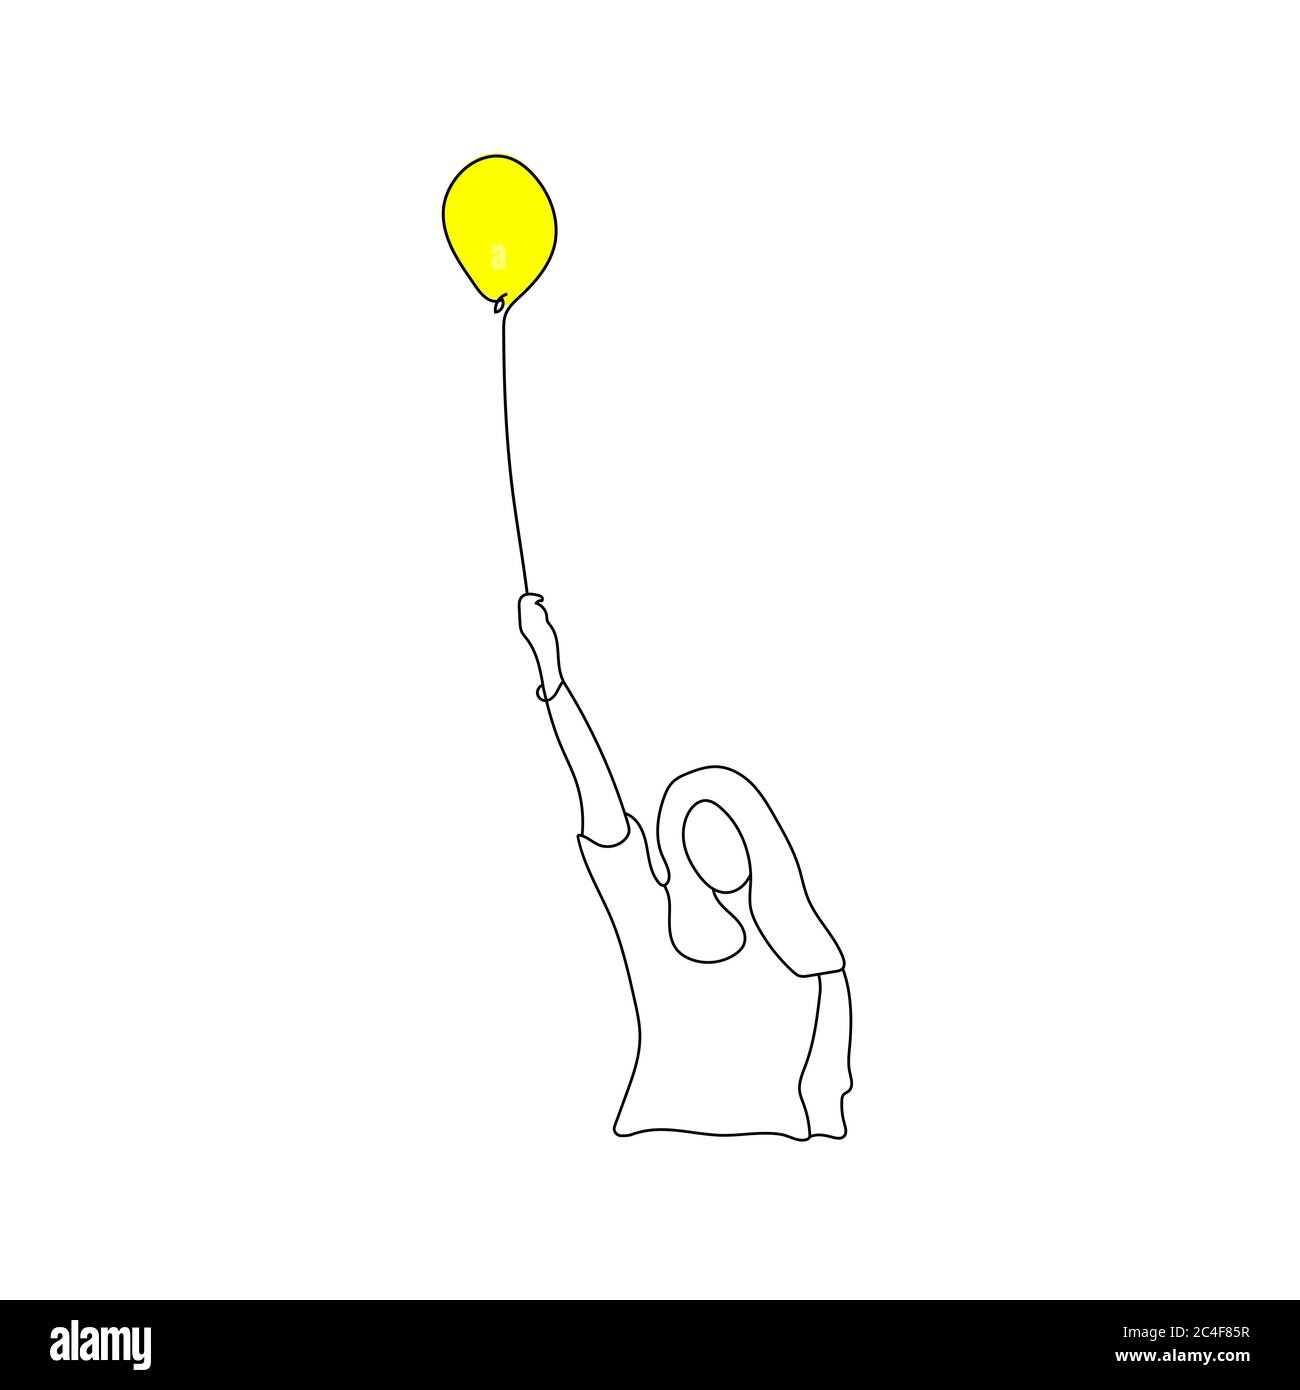 How to Draw a Balloon? - Step by Step Drawing Guide for Kids